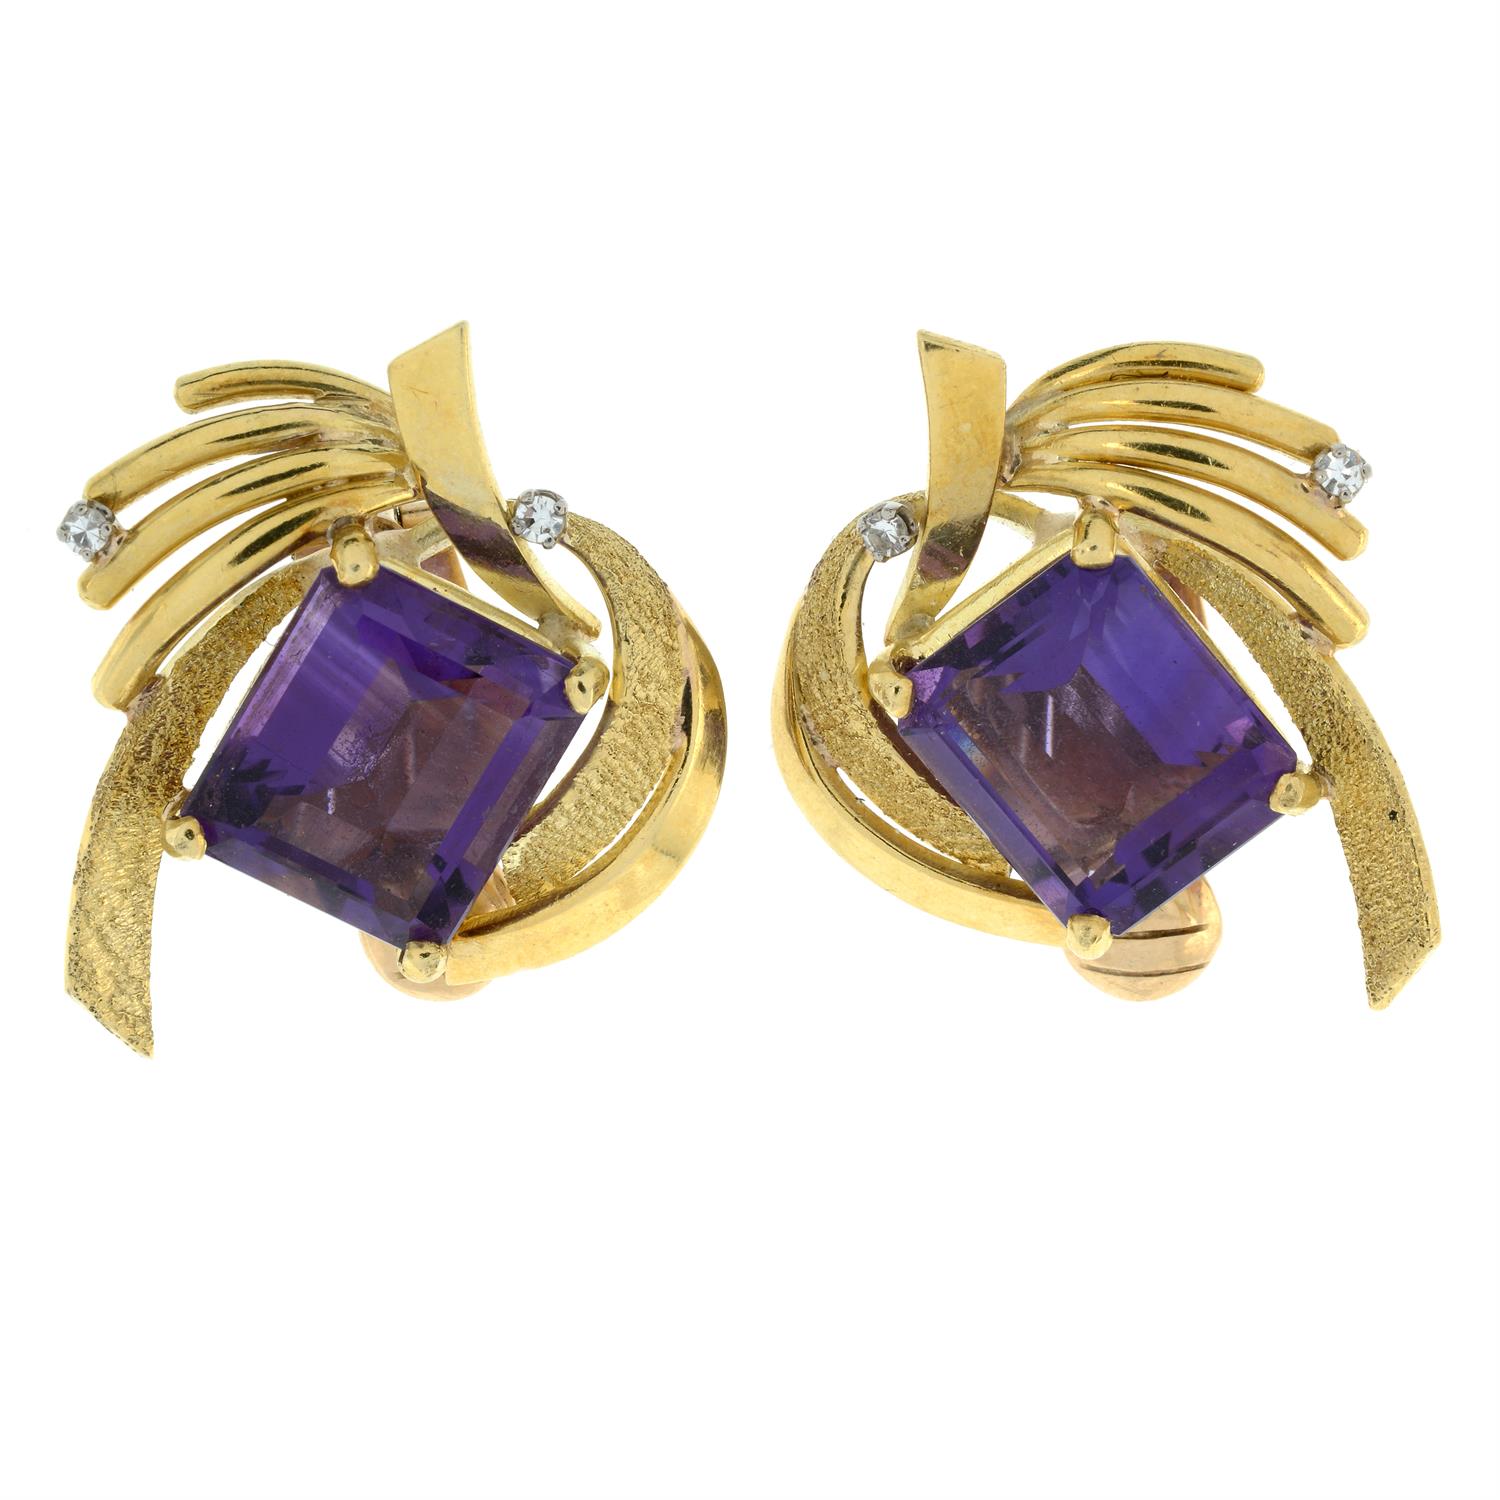 A pair of amethyst and diamond textured earrings. - Image 2 of 3